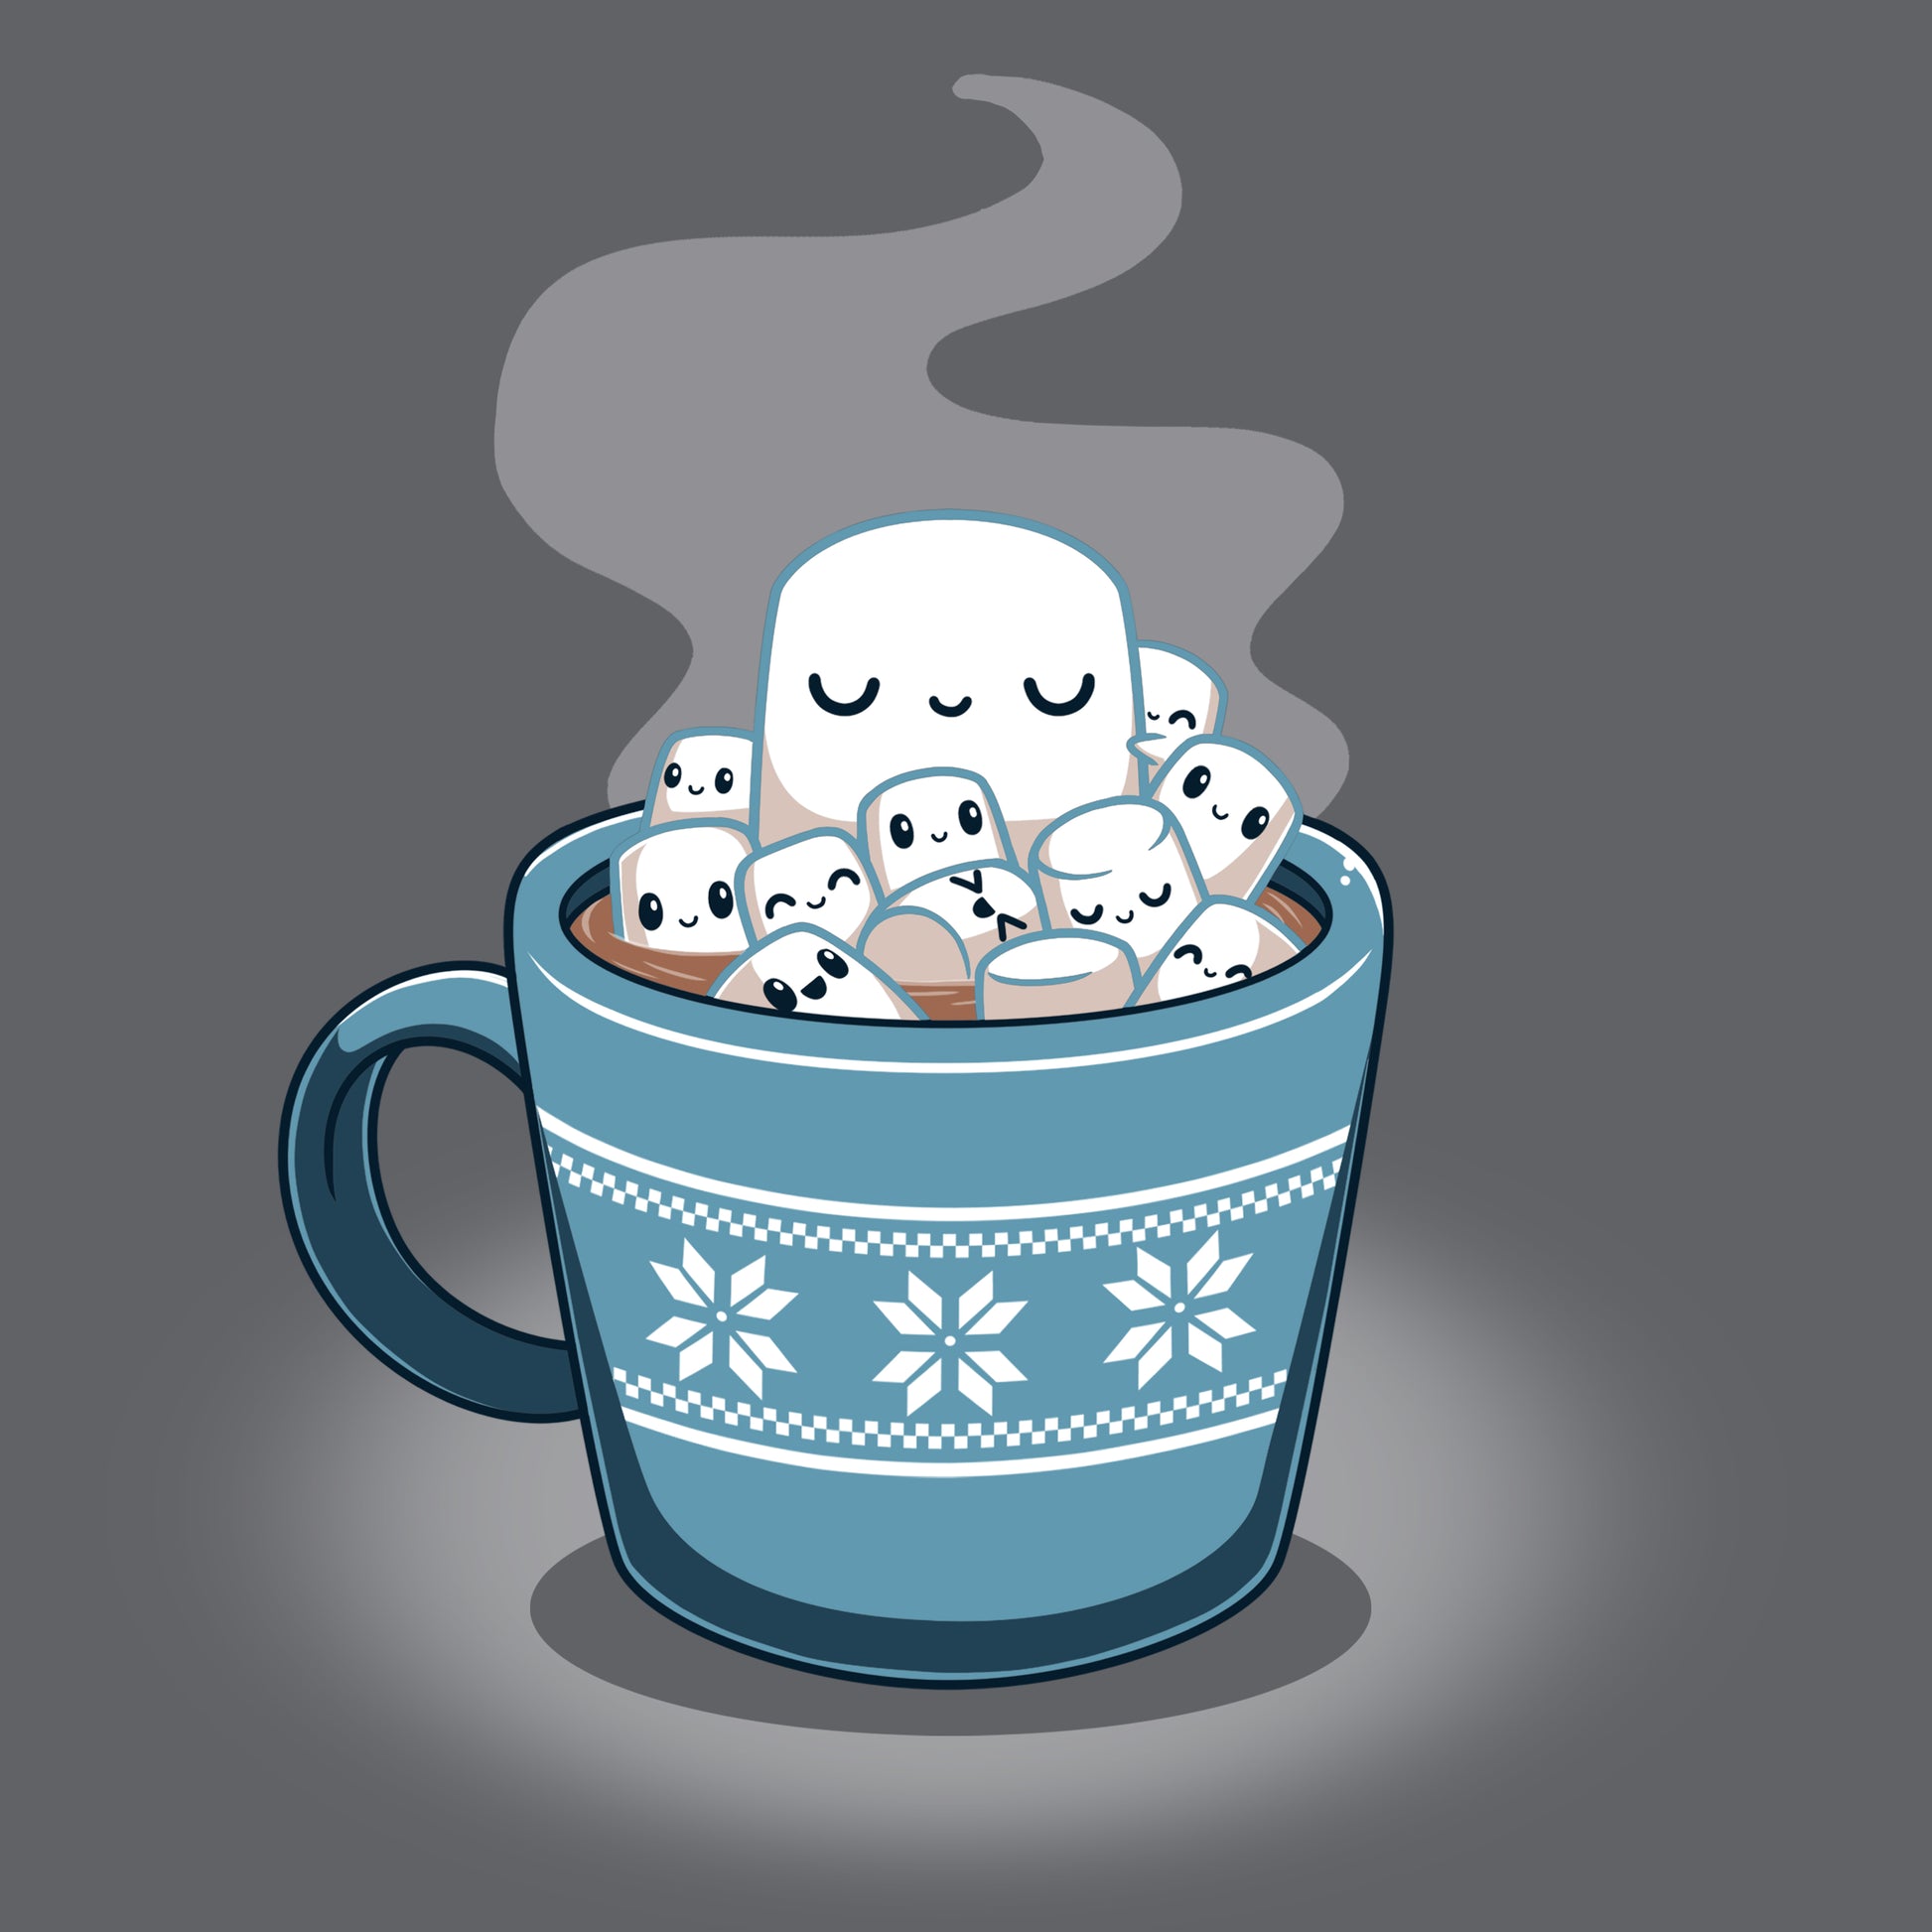 A cup of hot cocoa with marshmallows in it, made with TeeTurtle's Snug in a Mug.